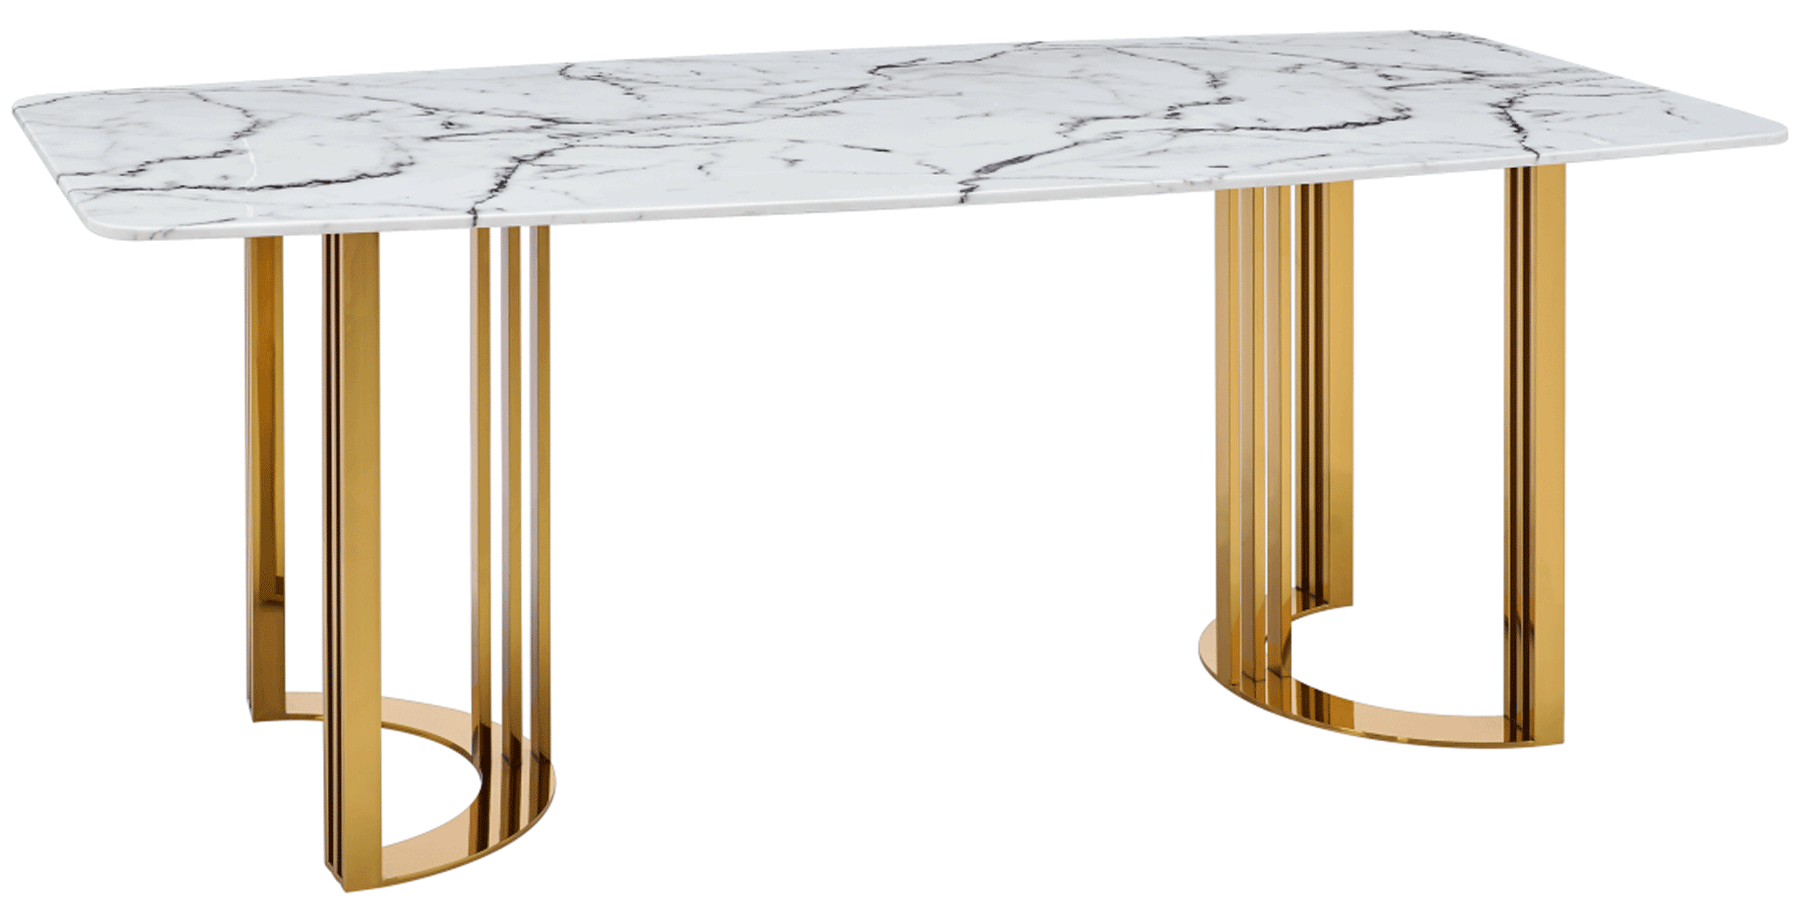 Brands Garcia Laurel & Hardy Tables 131 Gold Marble Dining Table